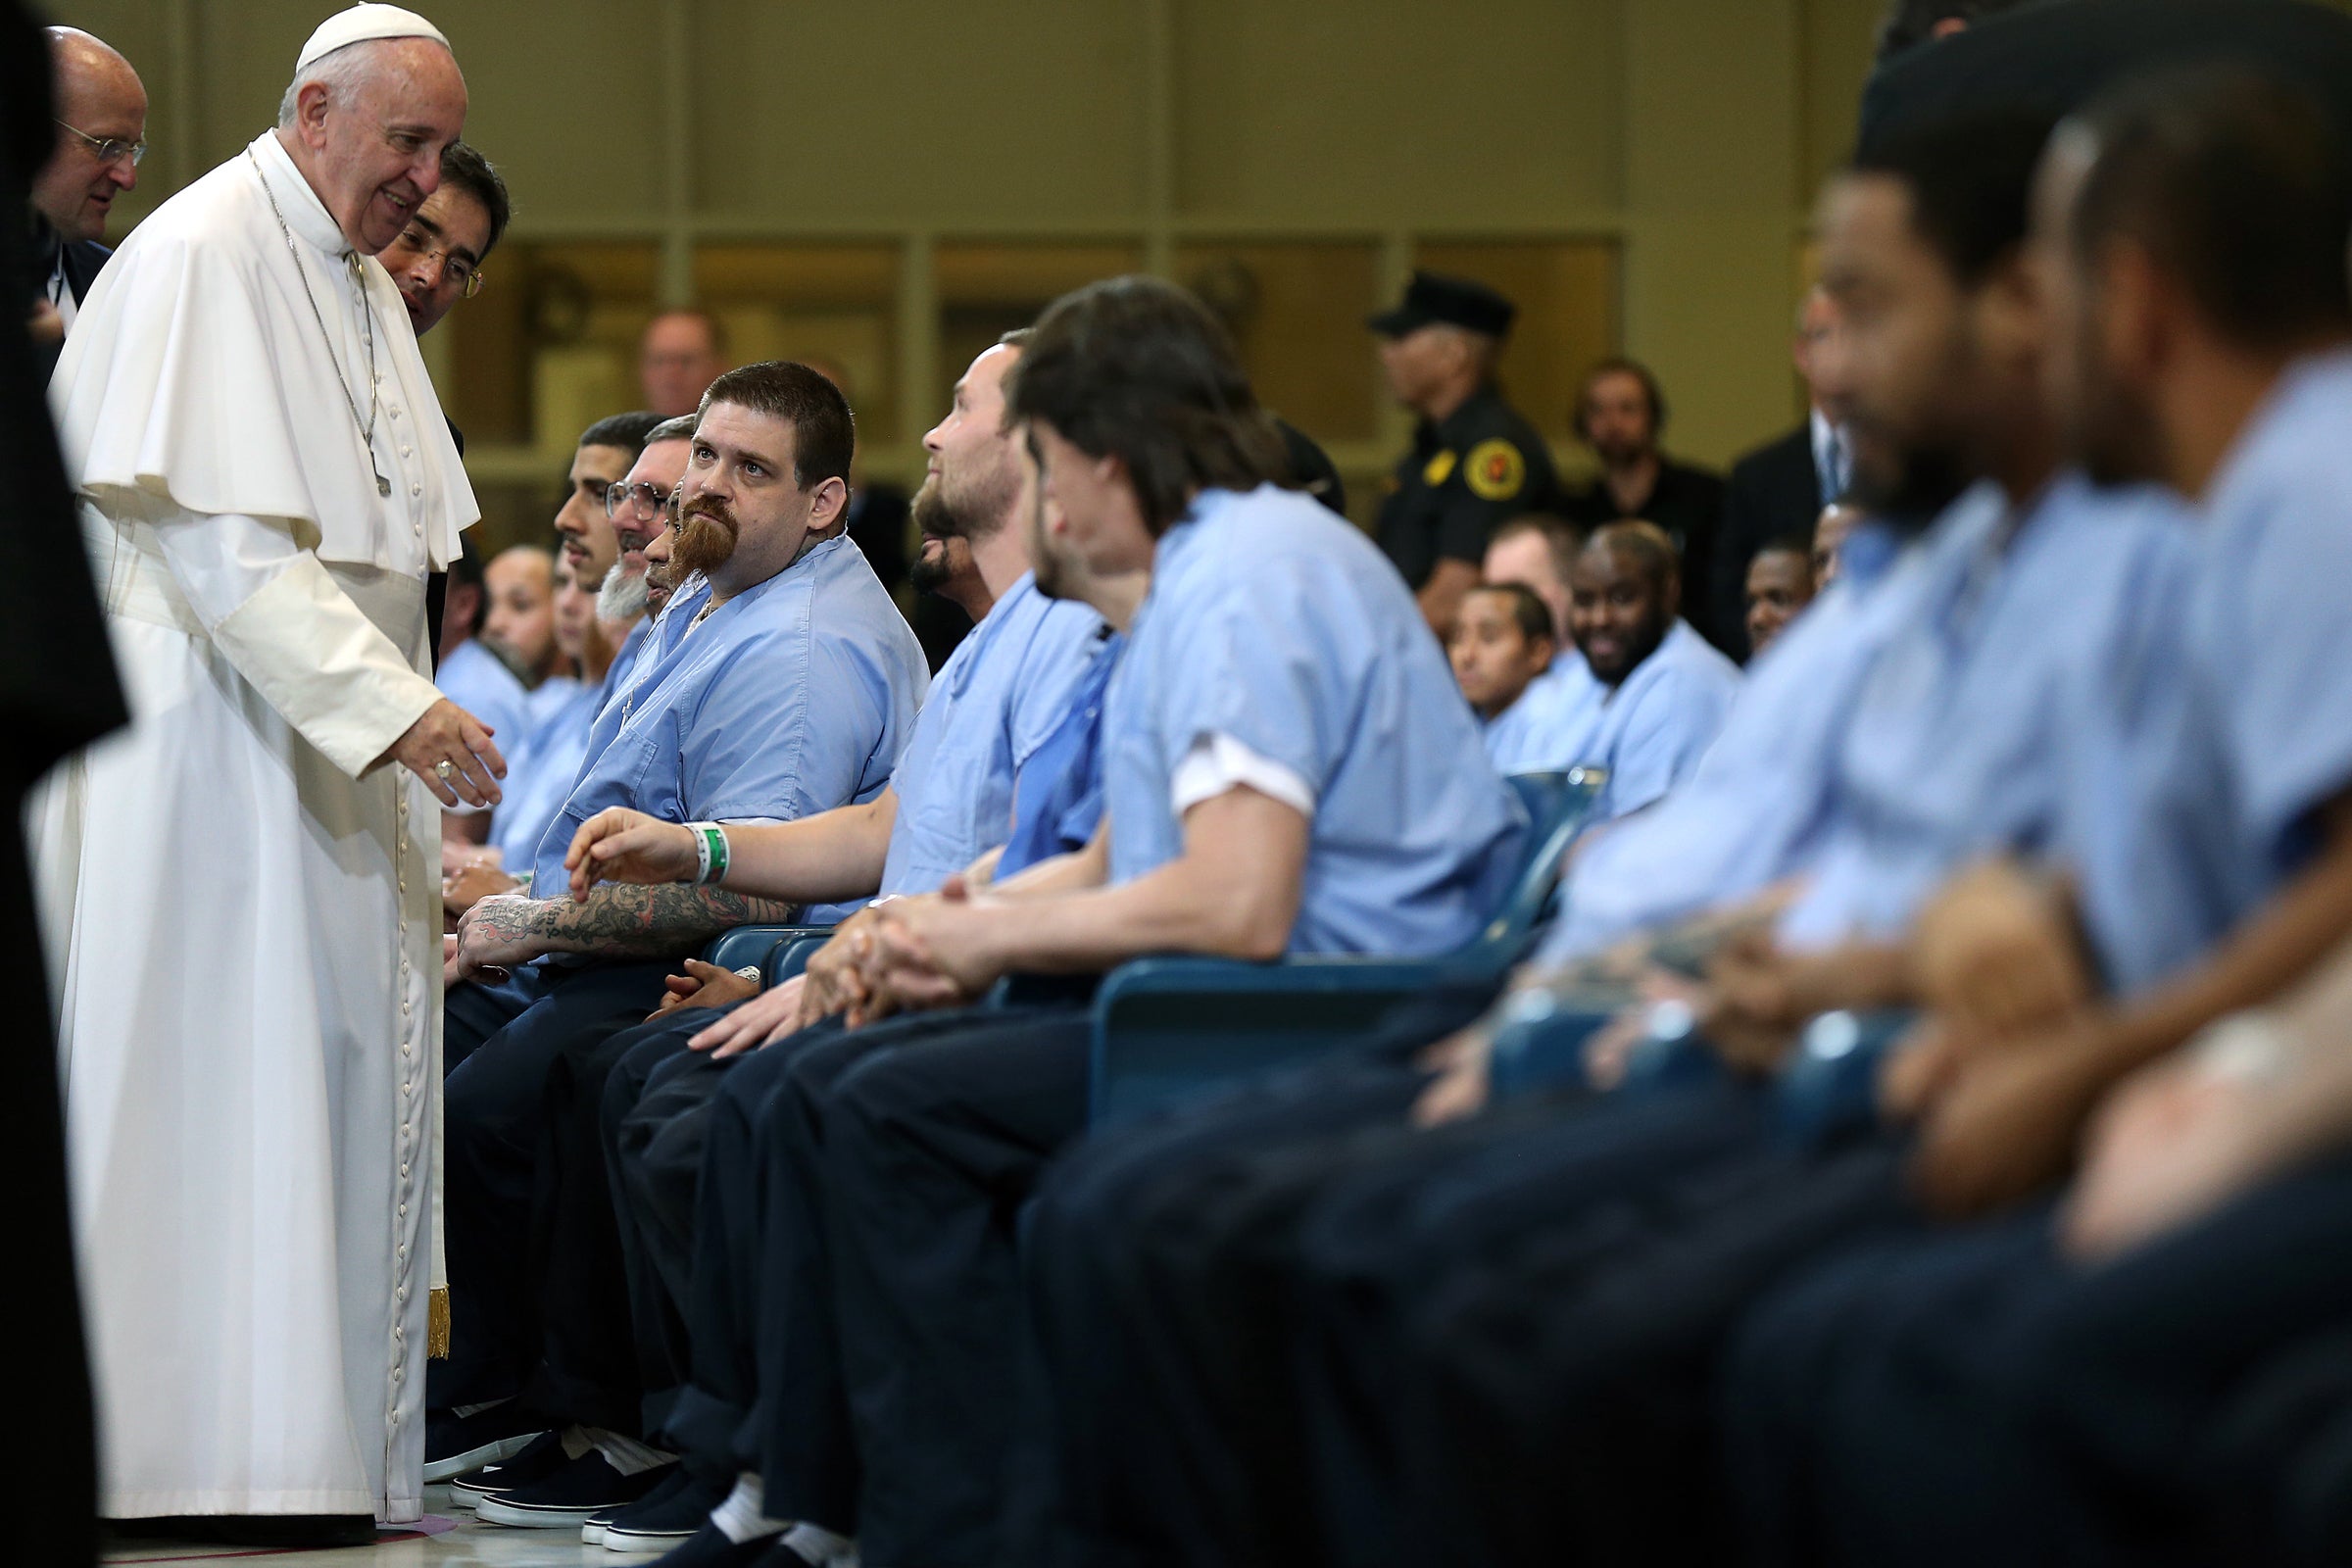  Pope Francis greets inmates during his visit to Curran Fromhold Correctional Facility in Philadelphia, Sunday, Sept. 27, 2015. (David Maialetti/The Philadelphia Inquirer, Pool) 